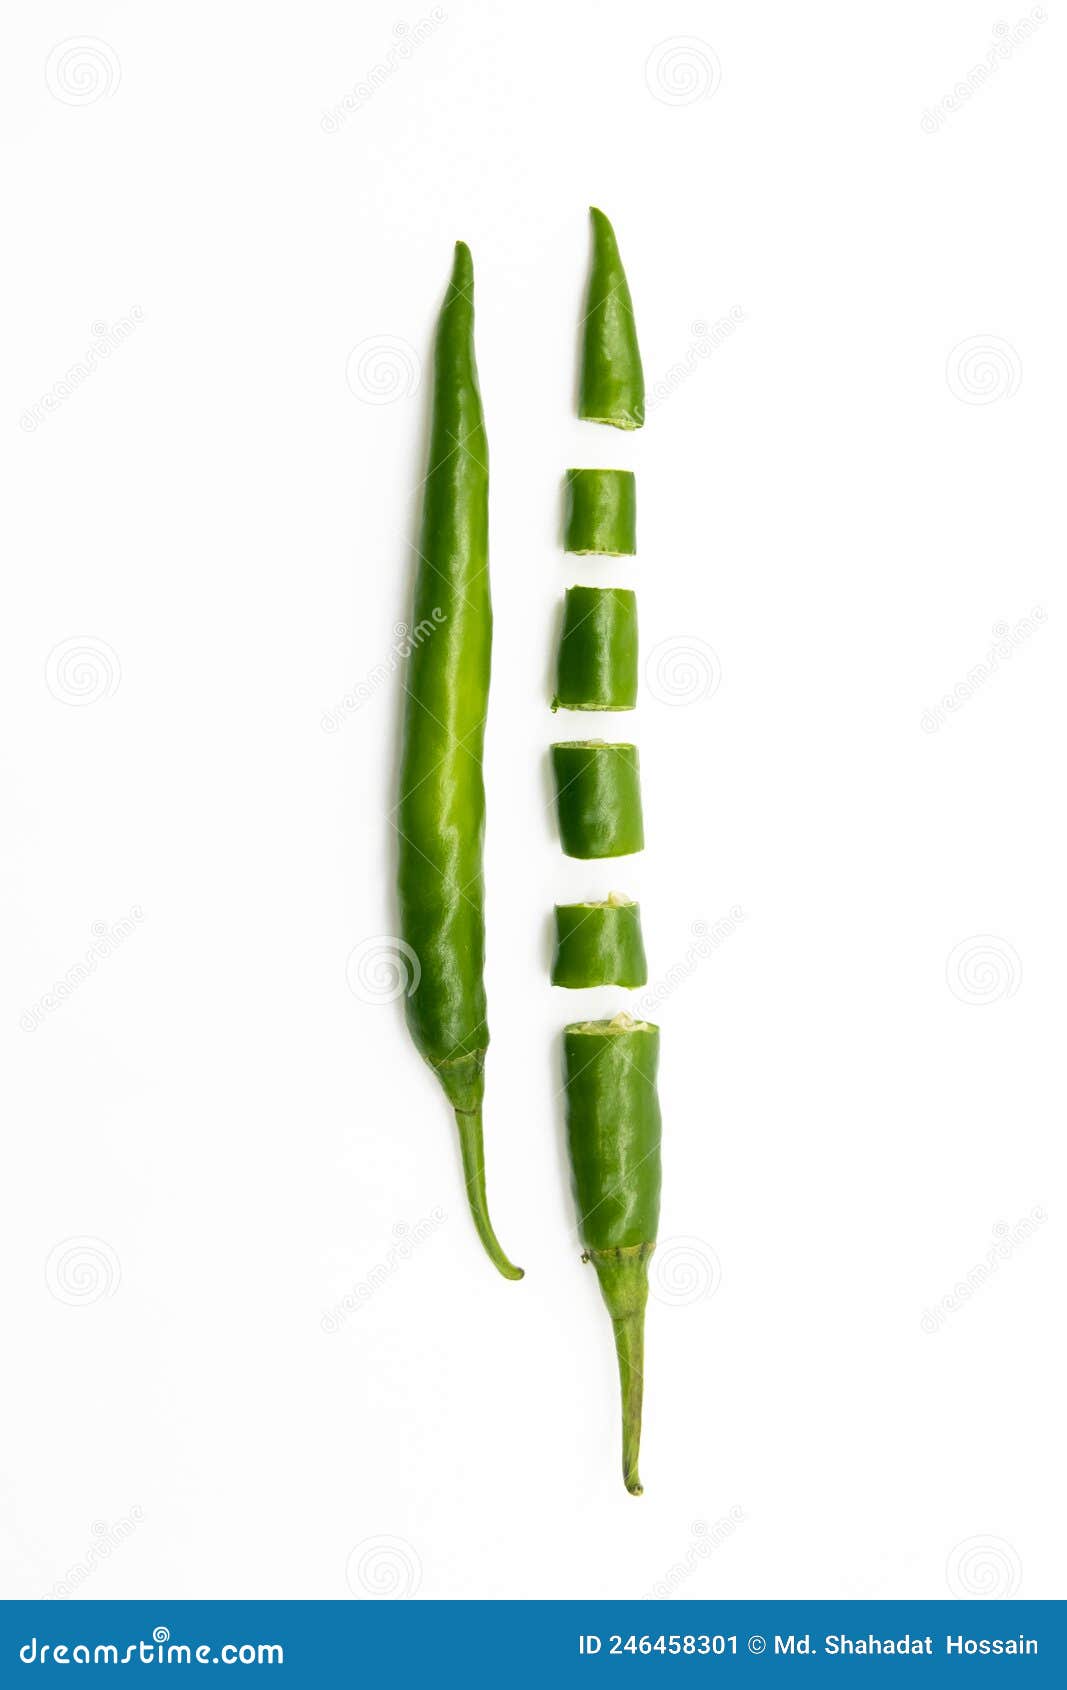 whole and slices lumbre green chili pepper  on white background